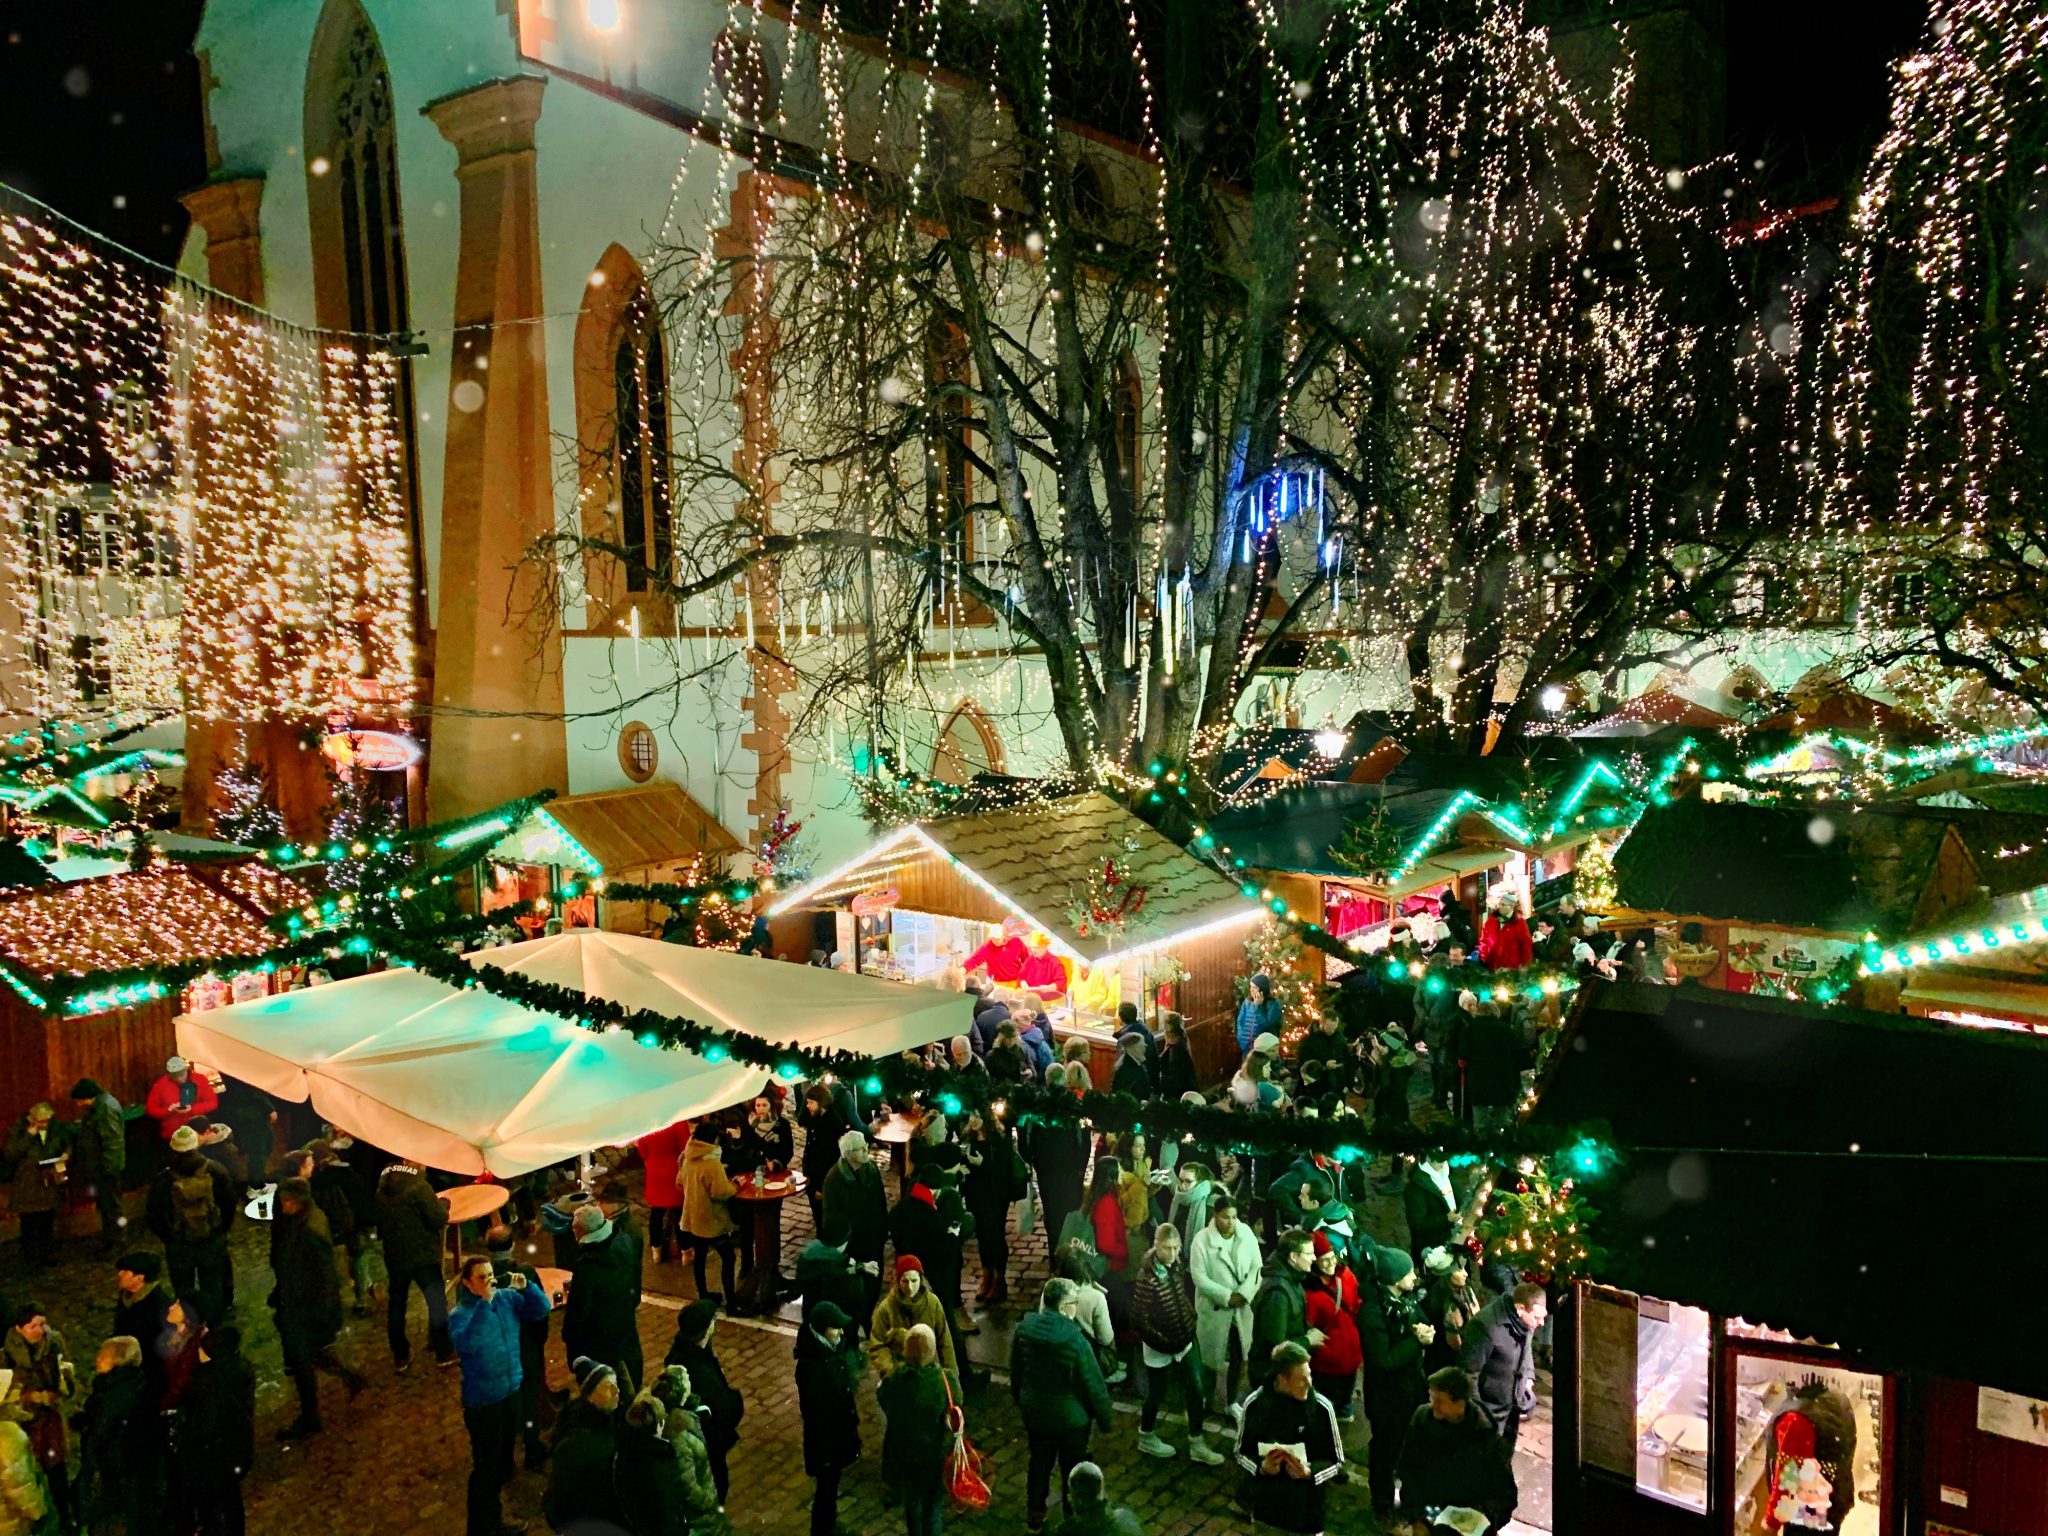 Four Unique Christmas Markets In Germany - The Curious Creature